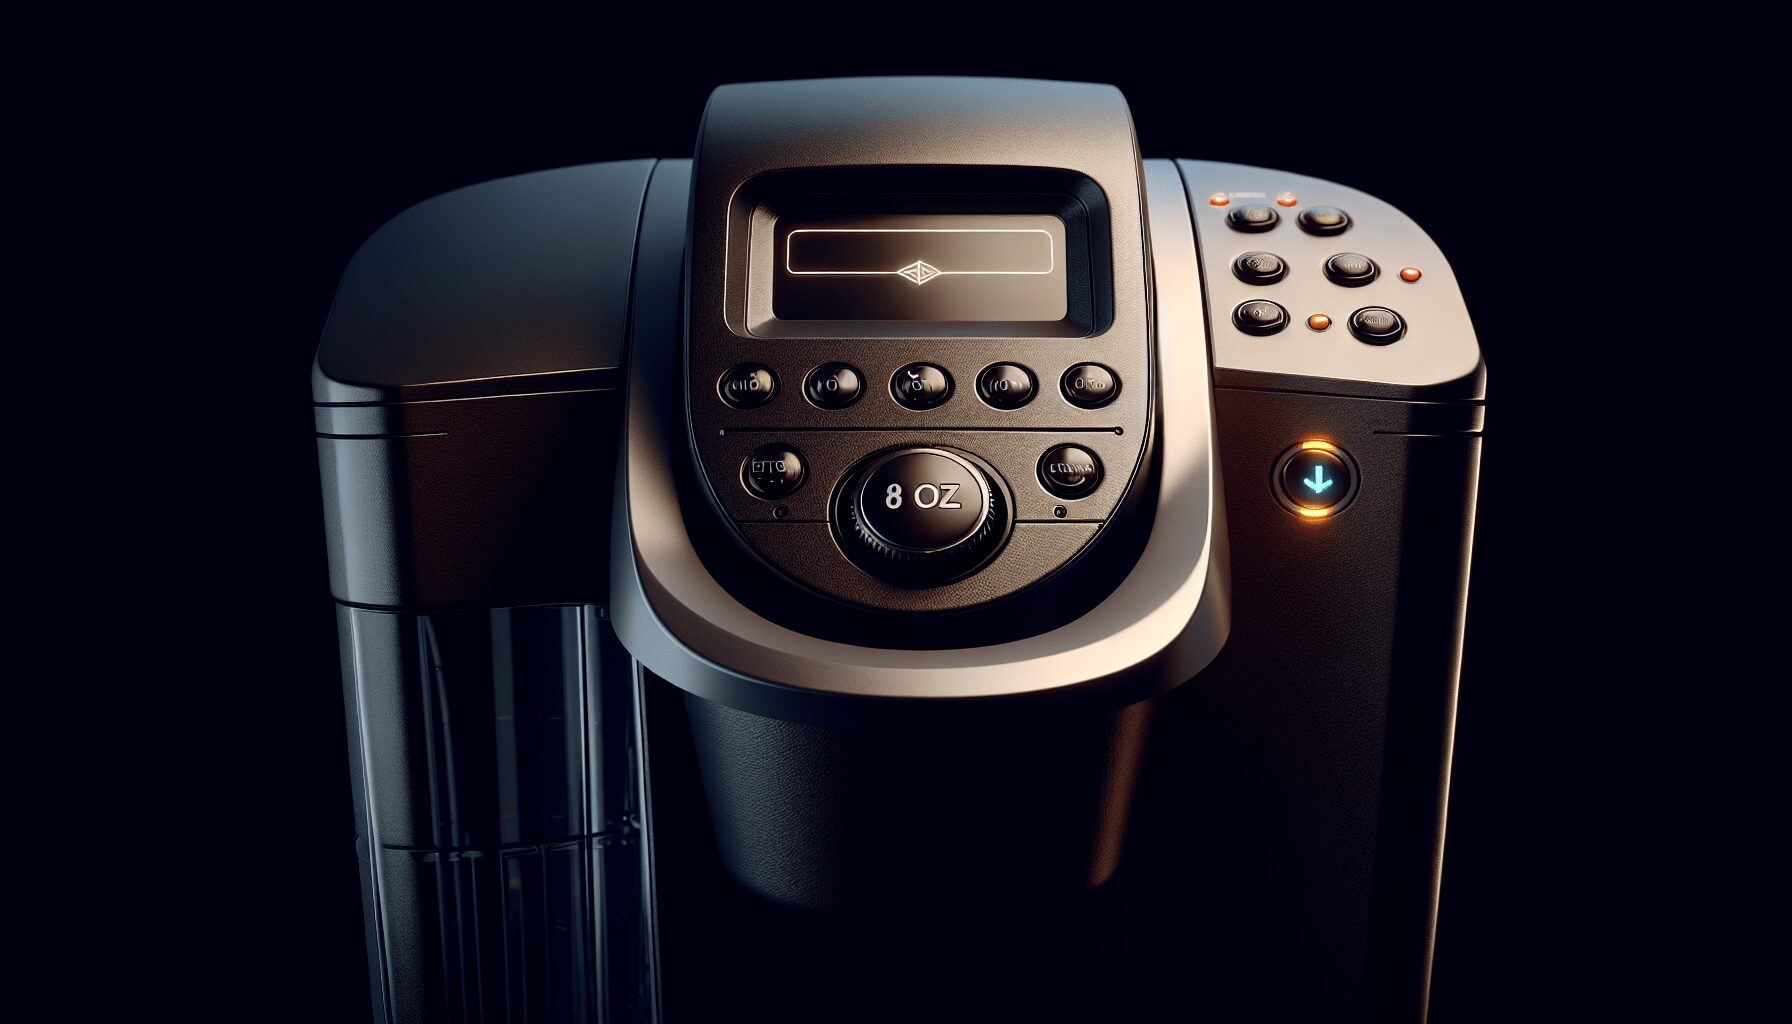 How to Find the 8 oz Button on Your Keurig